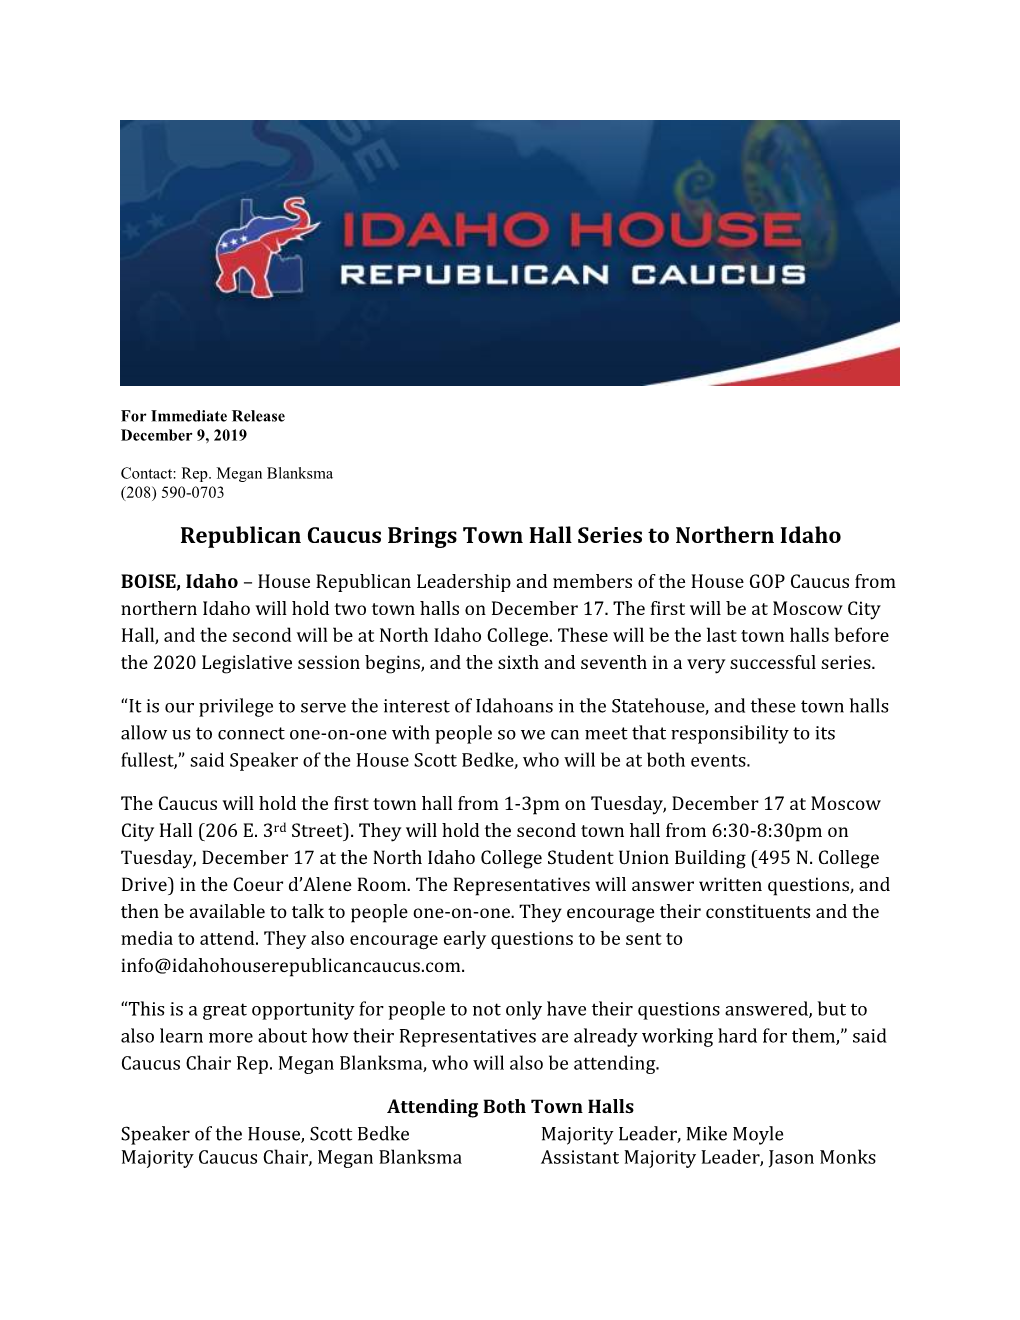 Republican Caucus Brings Town Hall Series to Northern Idaho